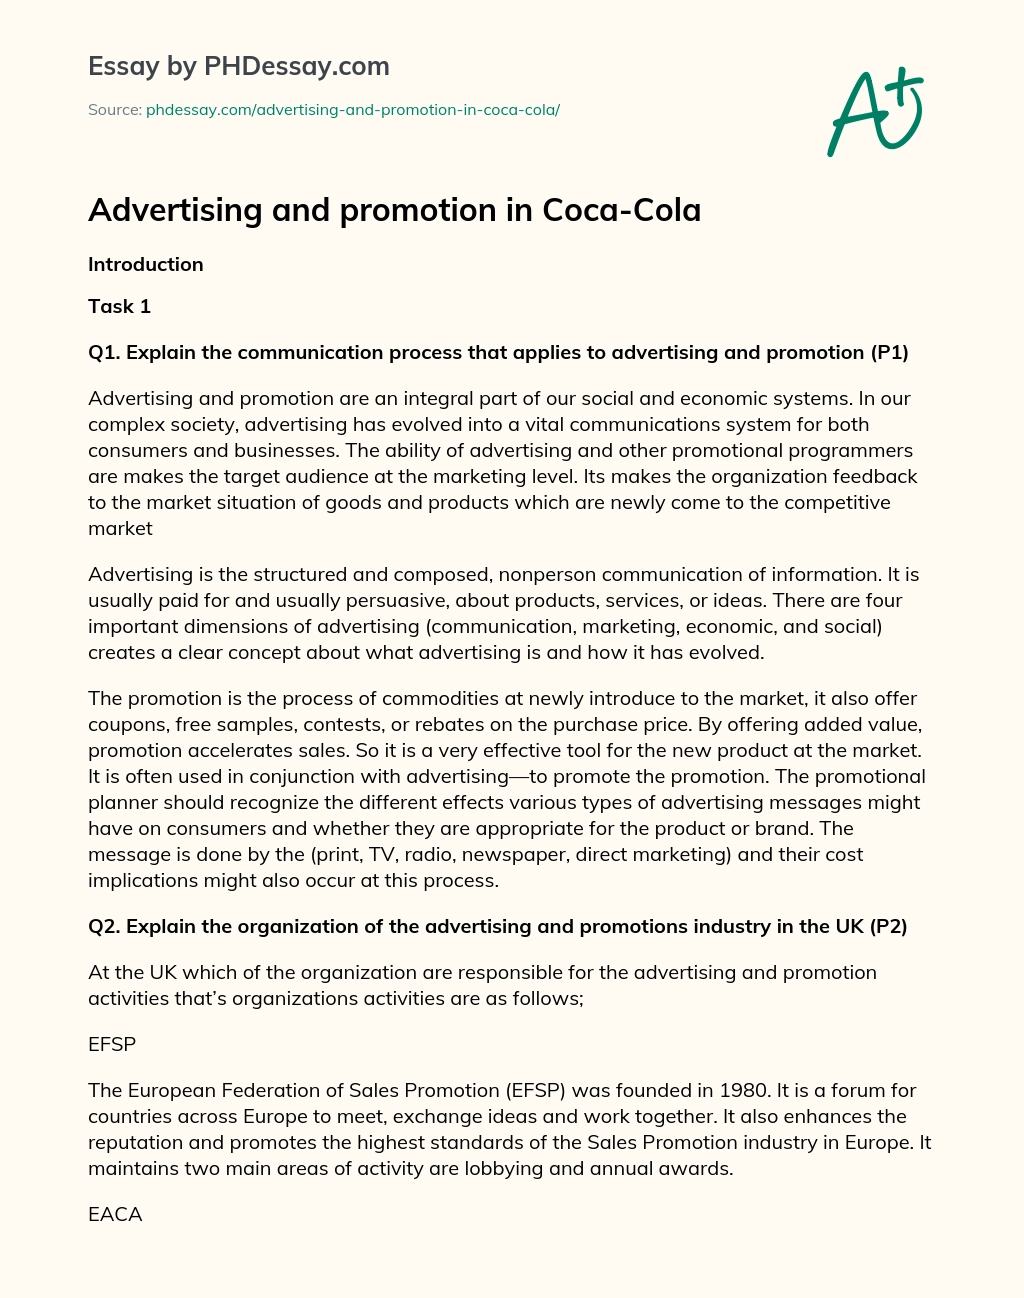 Advertising and promotion in Coca-Cola essay